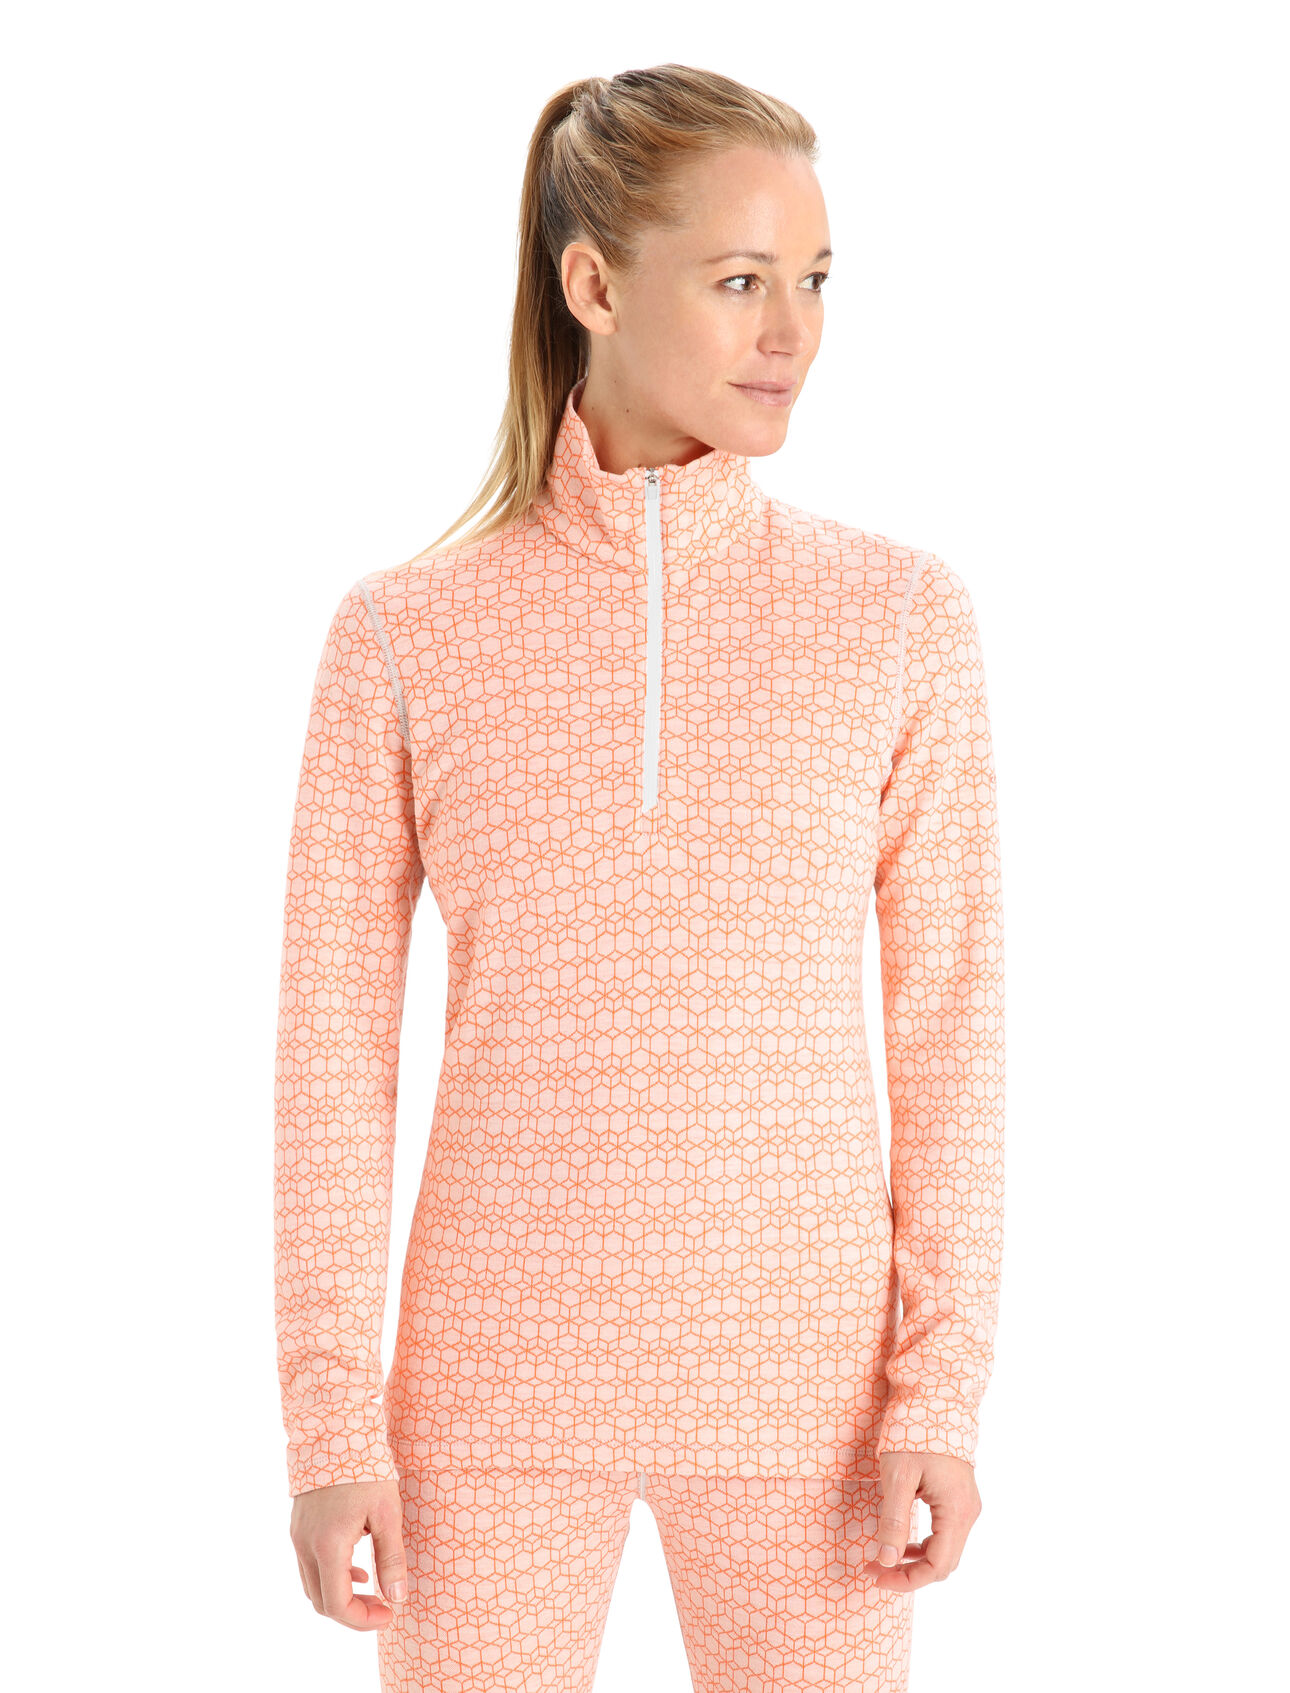 Womens Merino 250 Vertex Long Sleeve Half Zip Thermal Top Alpine Geo An incredibly warm merino base layer with a unique jacquard pattern, the 250 Vertex Long Sleeve Half Zip Alpine Geo is a go-to piece for winter layering—ideal for skiing, snowshoeing and other cold-weather pursuits. The all-over graphic print draws inspiration from the fractal structure of a snowflake.